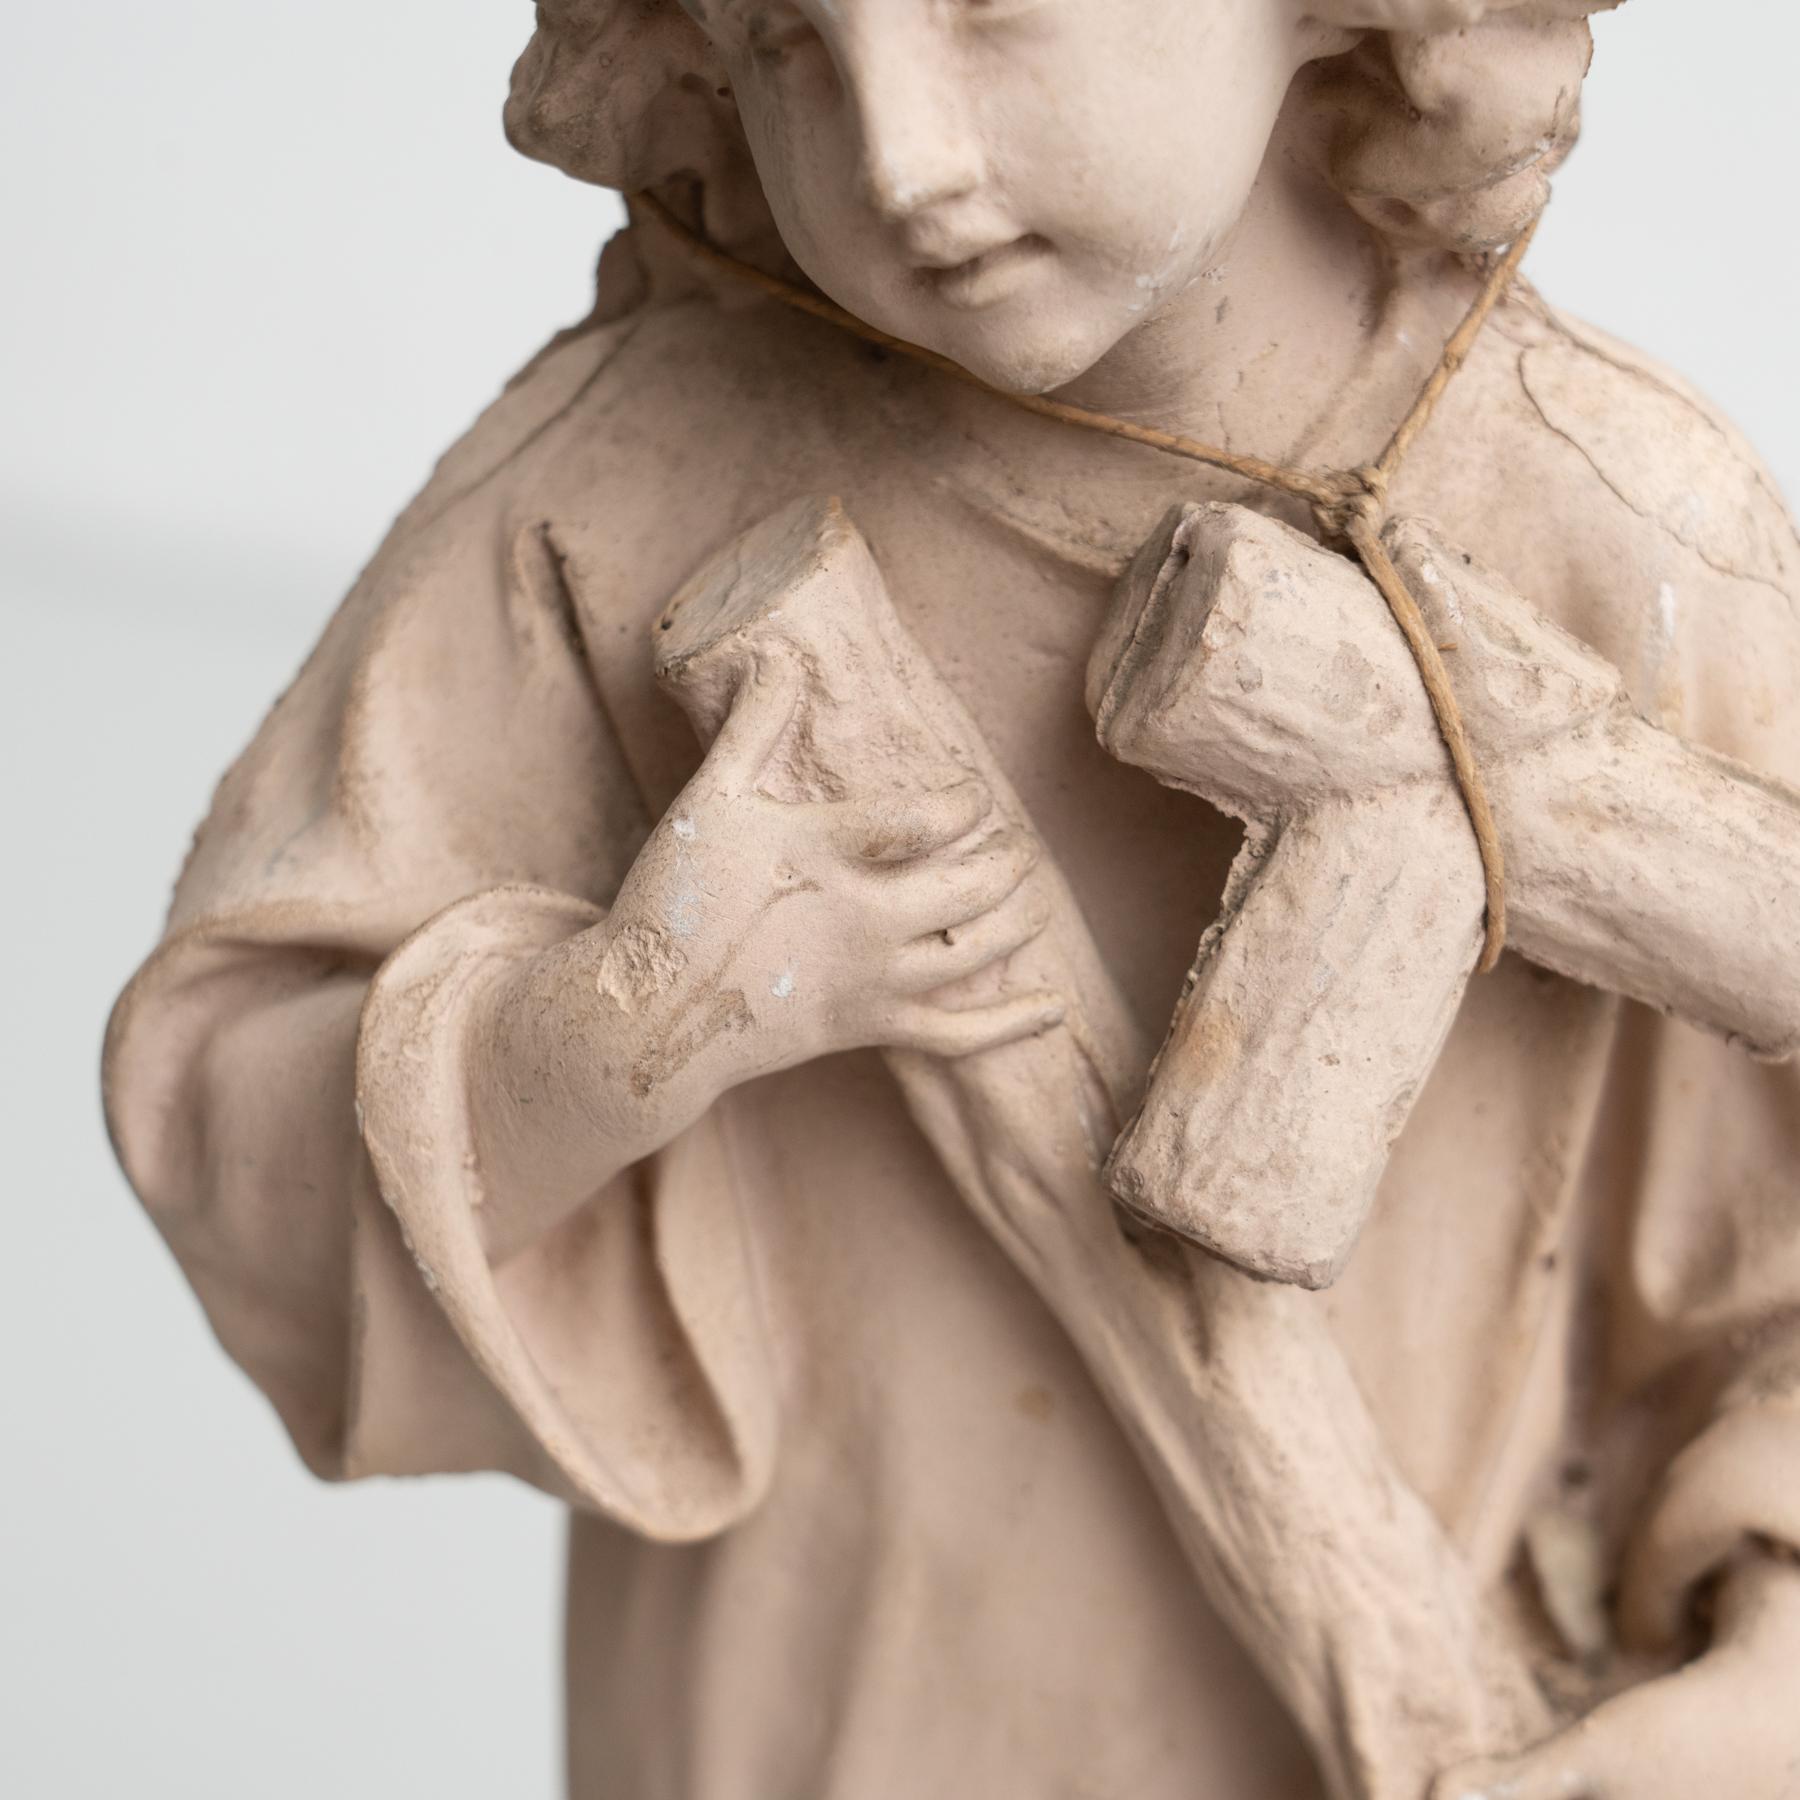 Plaster Religious Baby Jesus Christ Traditional Figure, circa 1950 In Good Condition For Sale In Barcelona, Barcelona